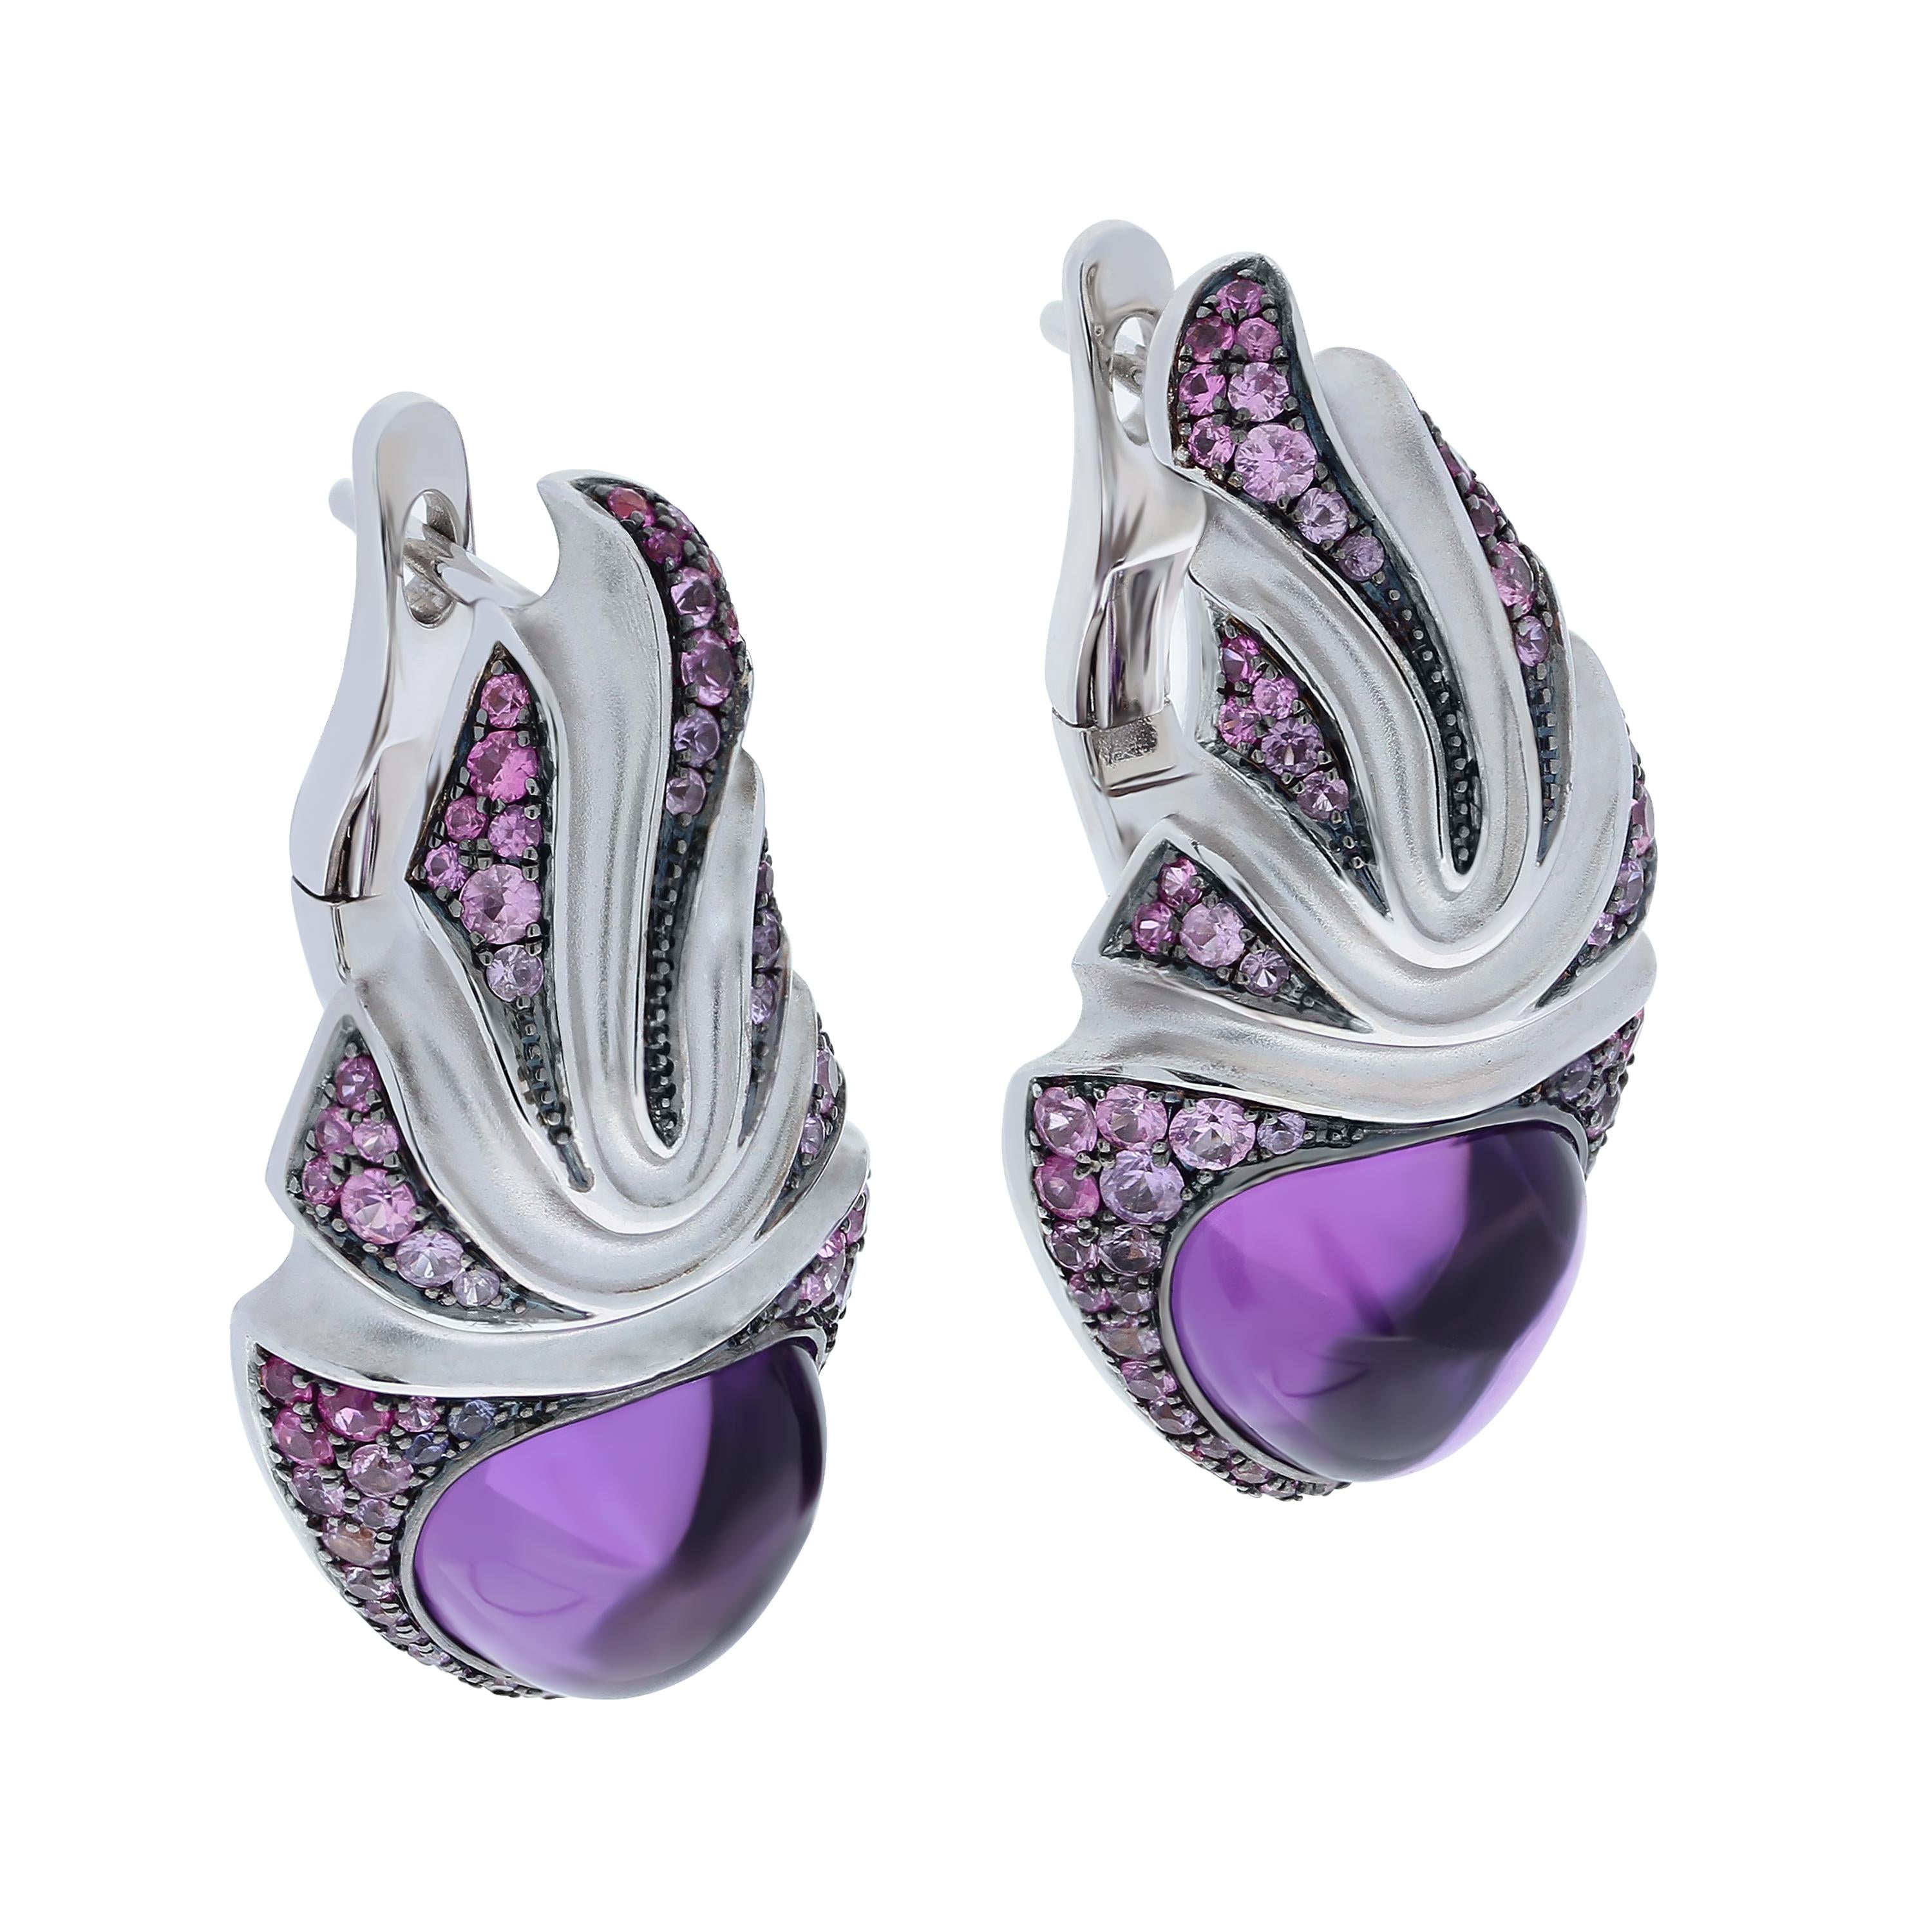 Amethyst 7.83 Carat Sapphire 18 Karat White Gold Earrings
As always, Mousson Atelier is playing with forms. Look at this incredibly stylish Earrings. It seems that 18 K White Gold literally flows like dough to the central stones, 7.83 Carat